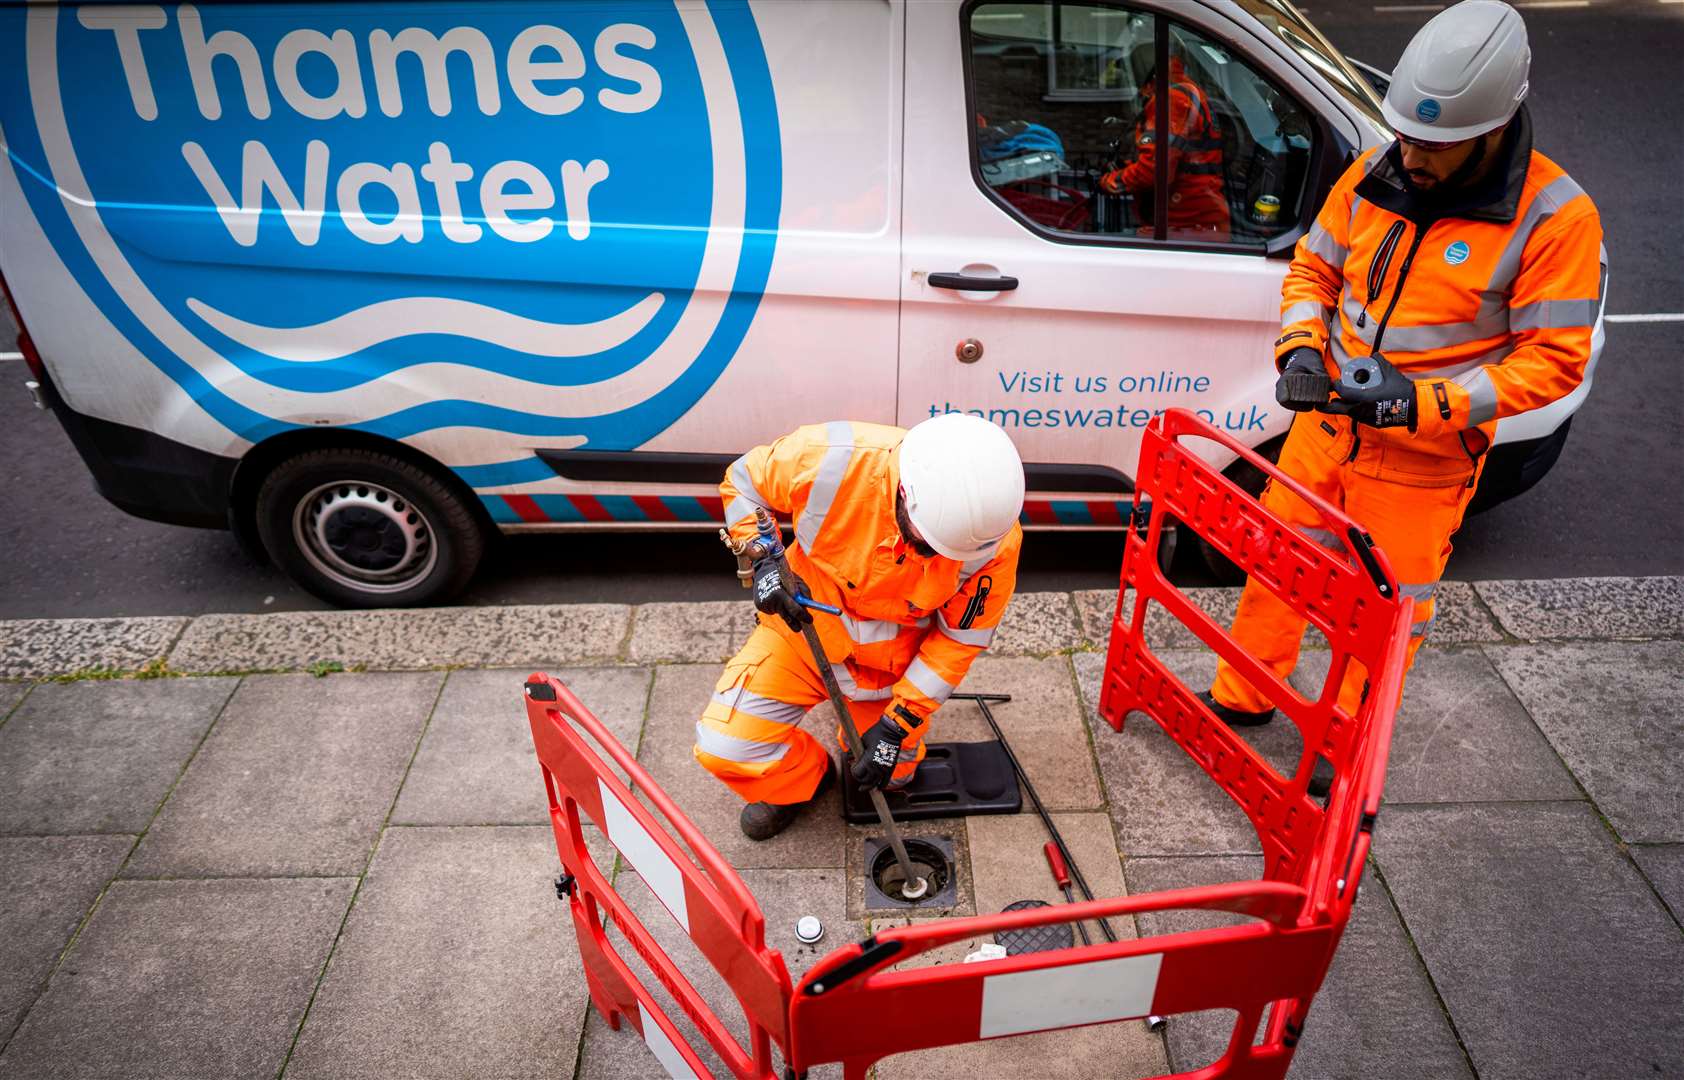 Engineers using a standpipe. Photo credit: Thames Water